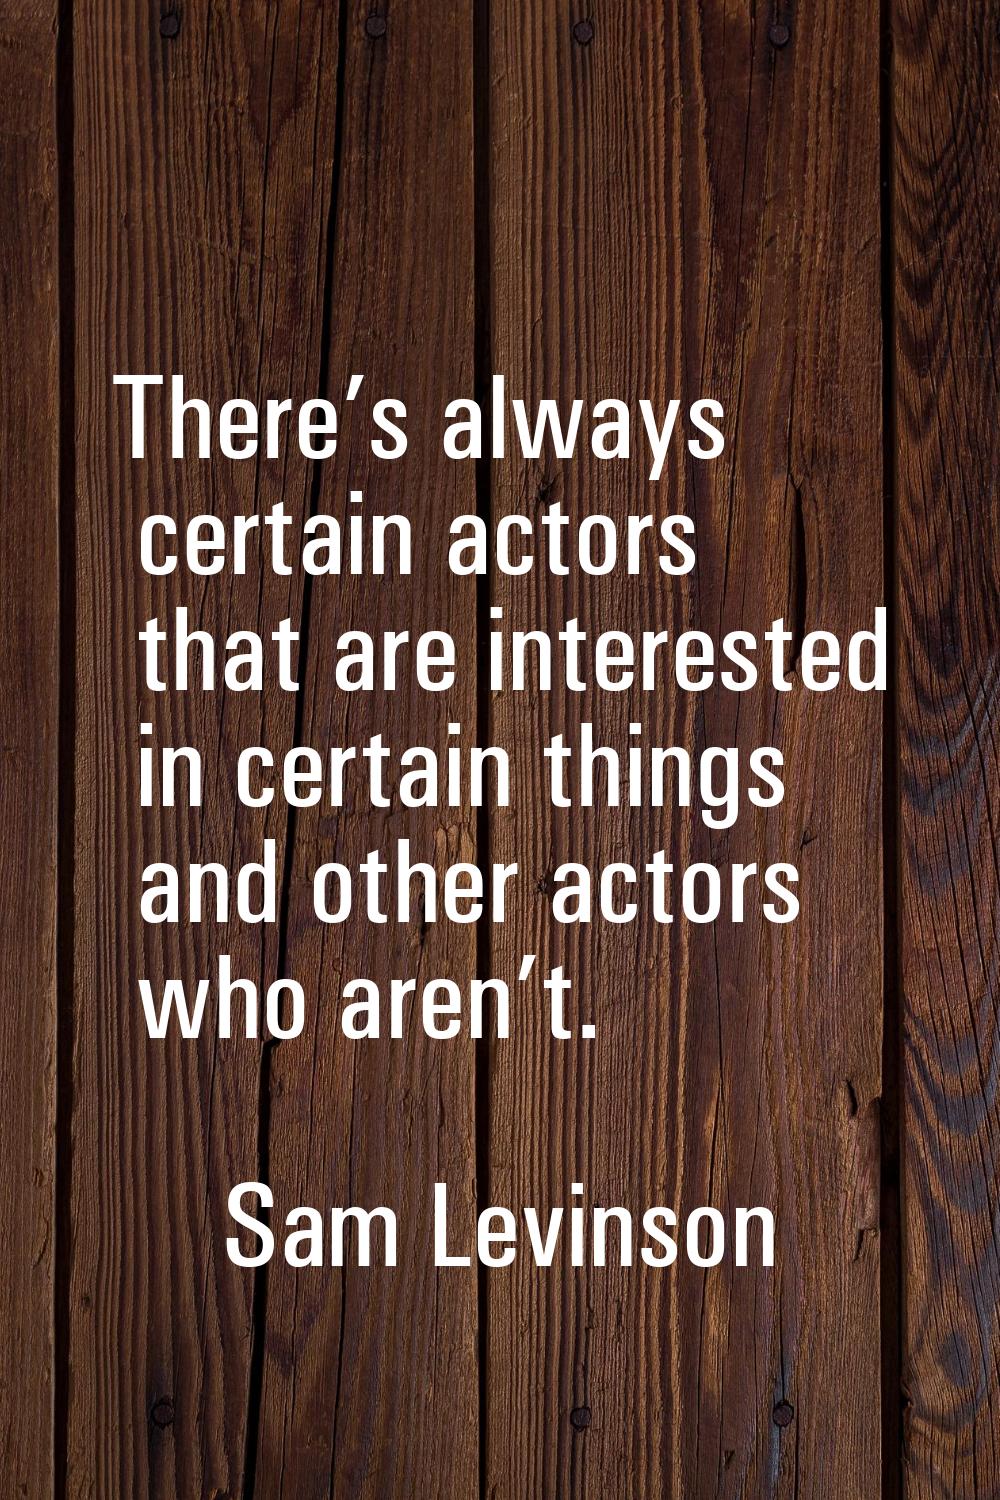 There’s always certain actors that are interested in certain things and other actors who aren’t.